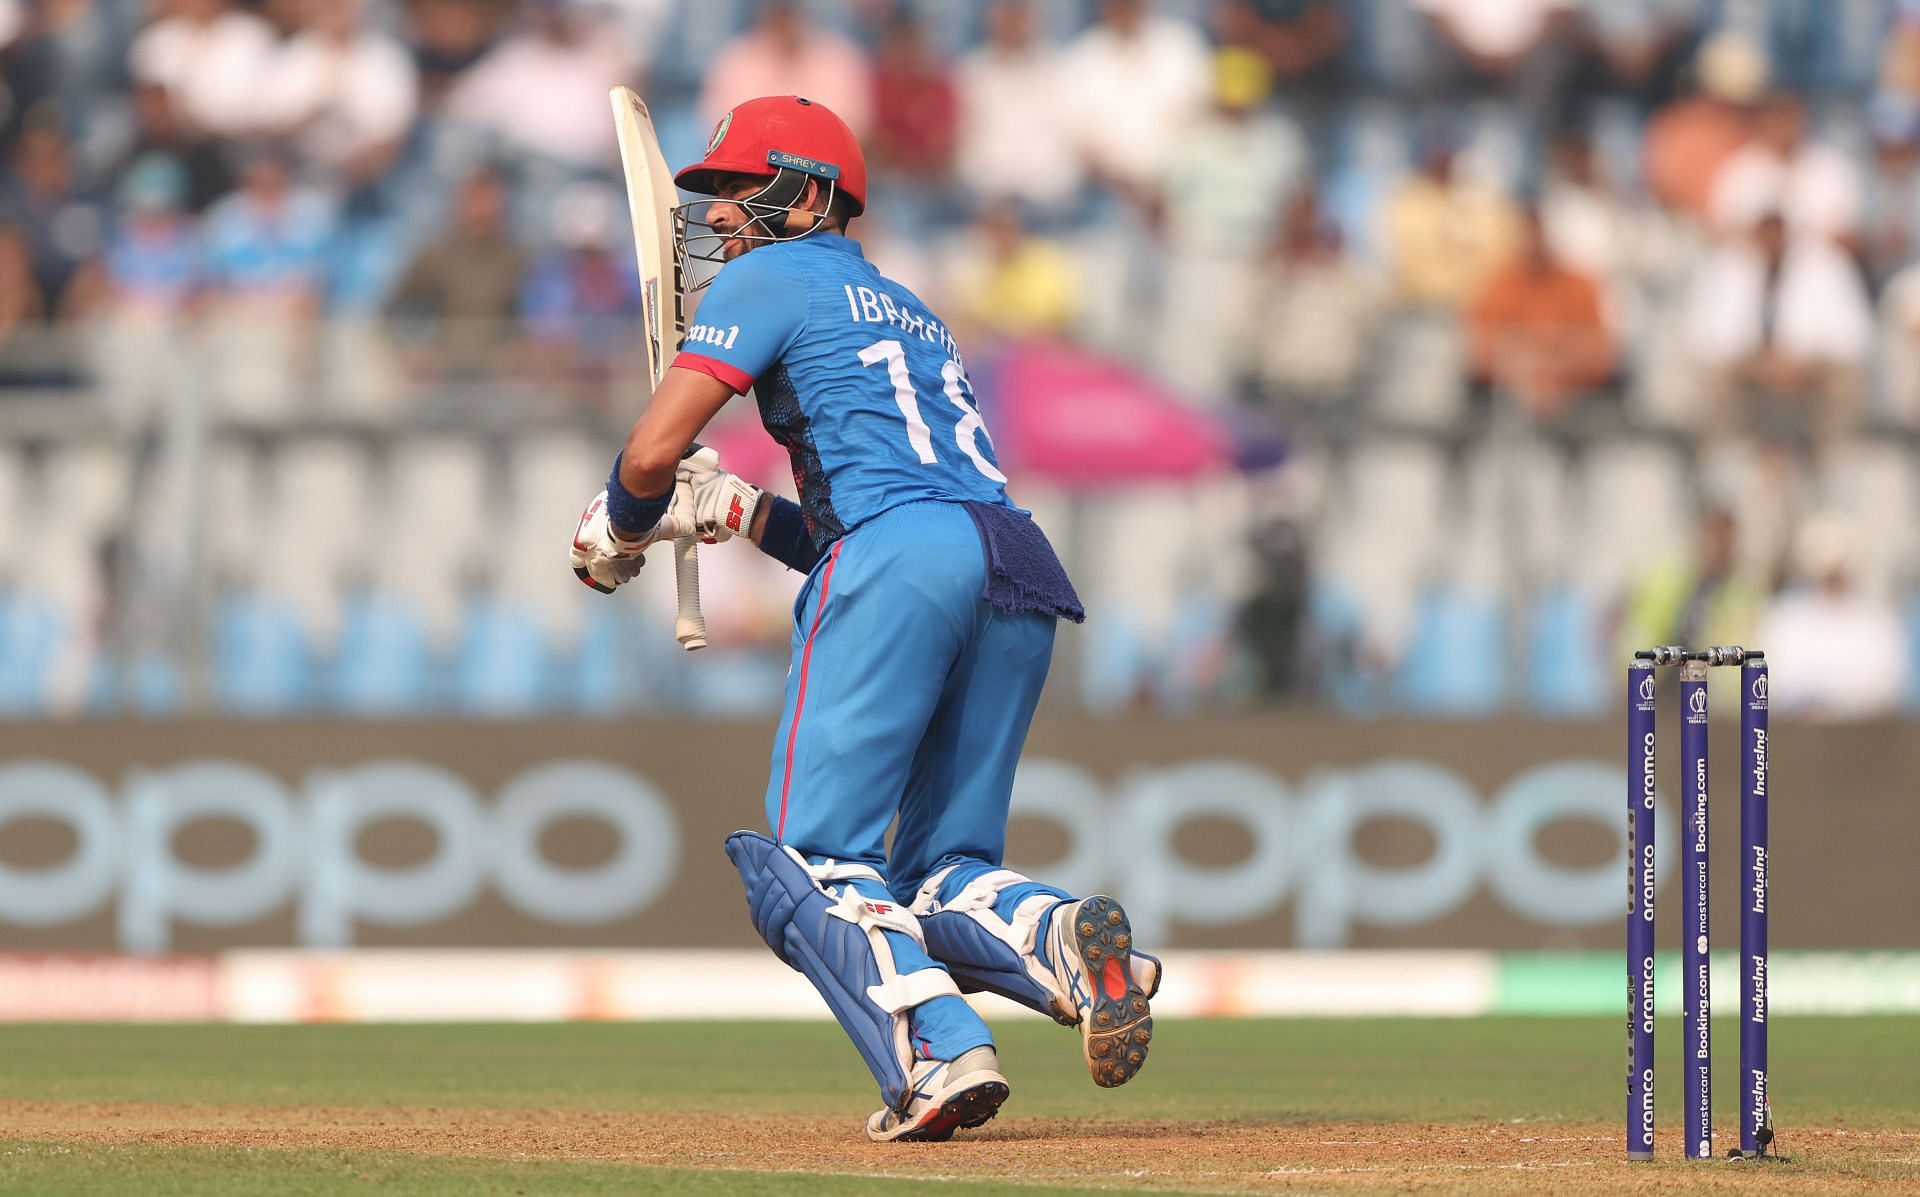 Ibrahim Zadran is going to be around for a long time to come